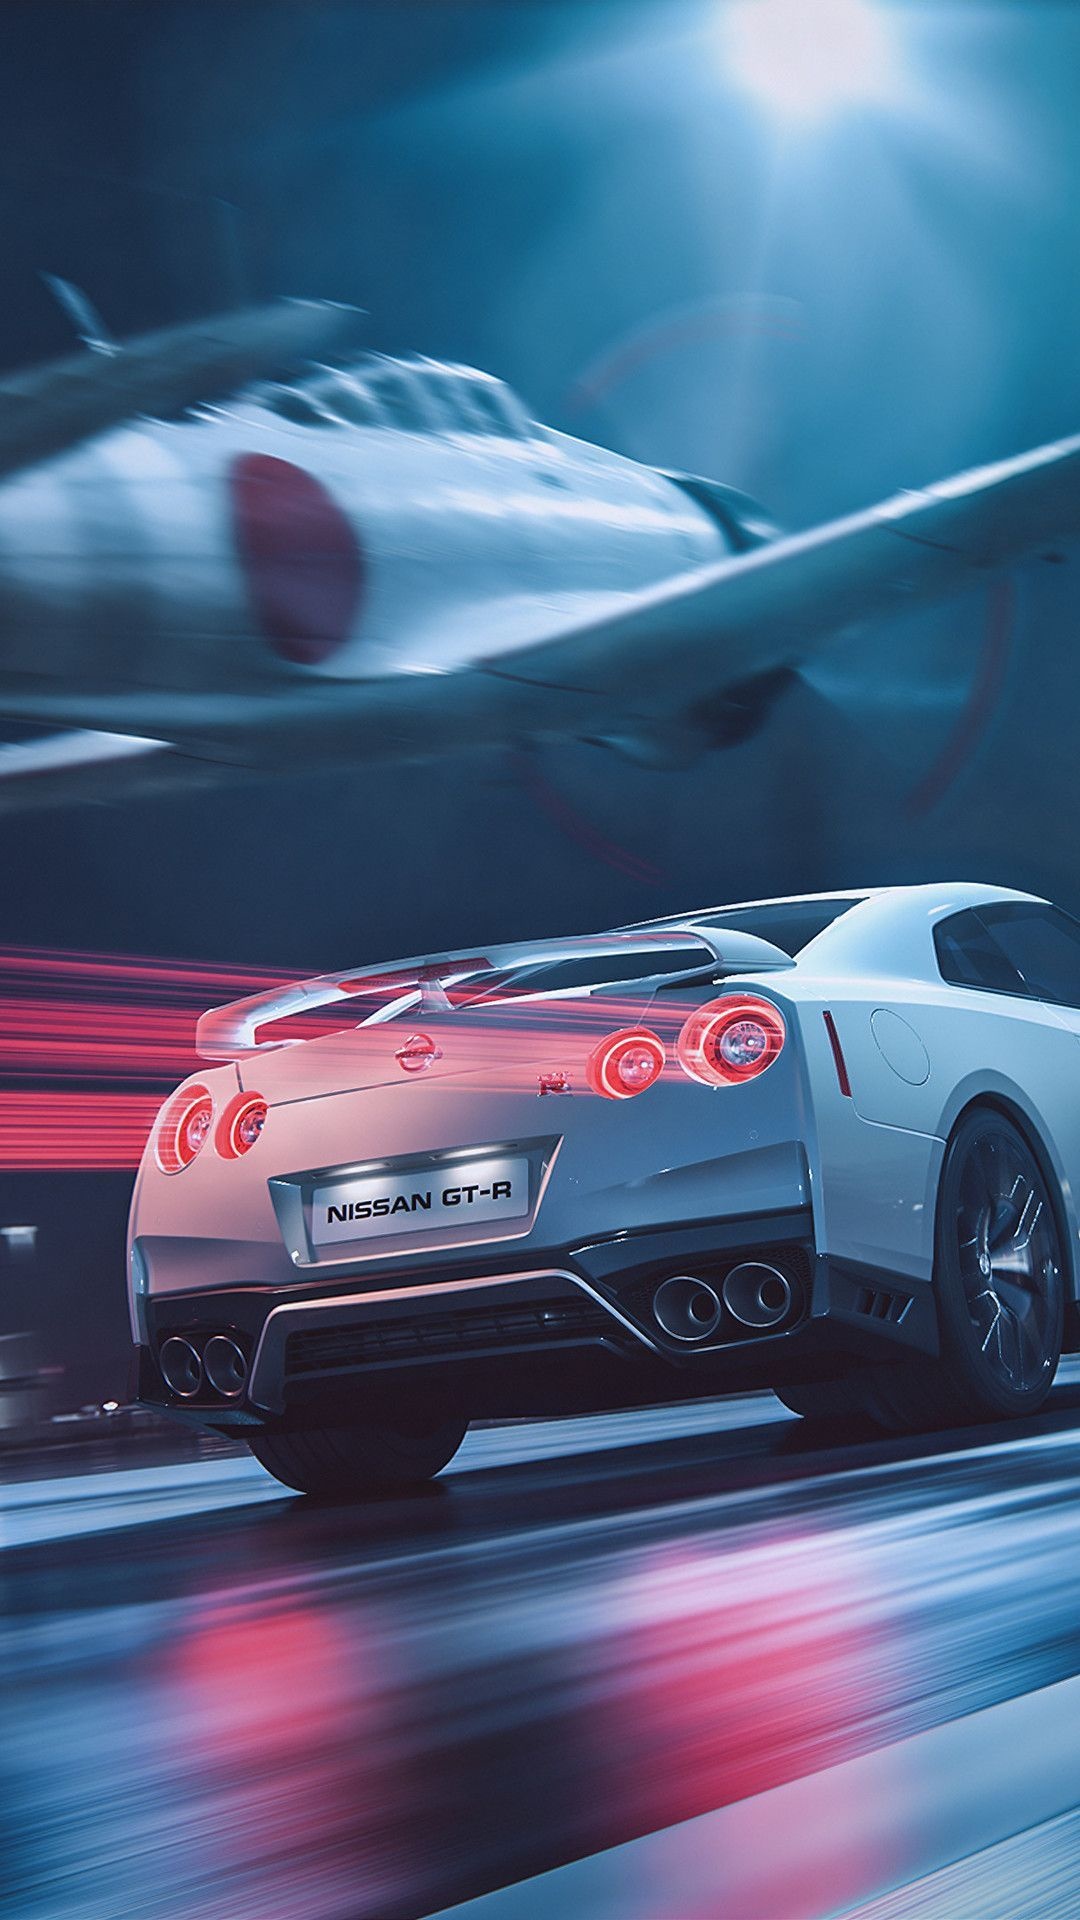 Nissan GT-R, Automotive power, Mobile style, Ultimate performance, 1080x1920 Full HD Phone